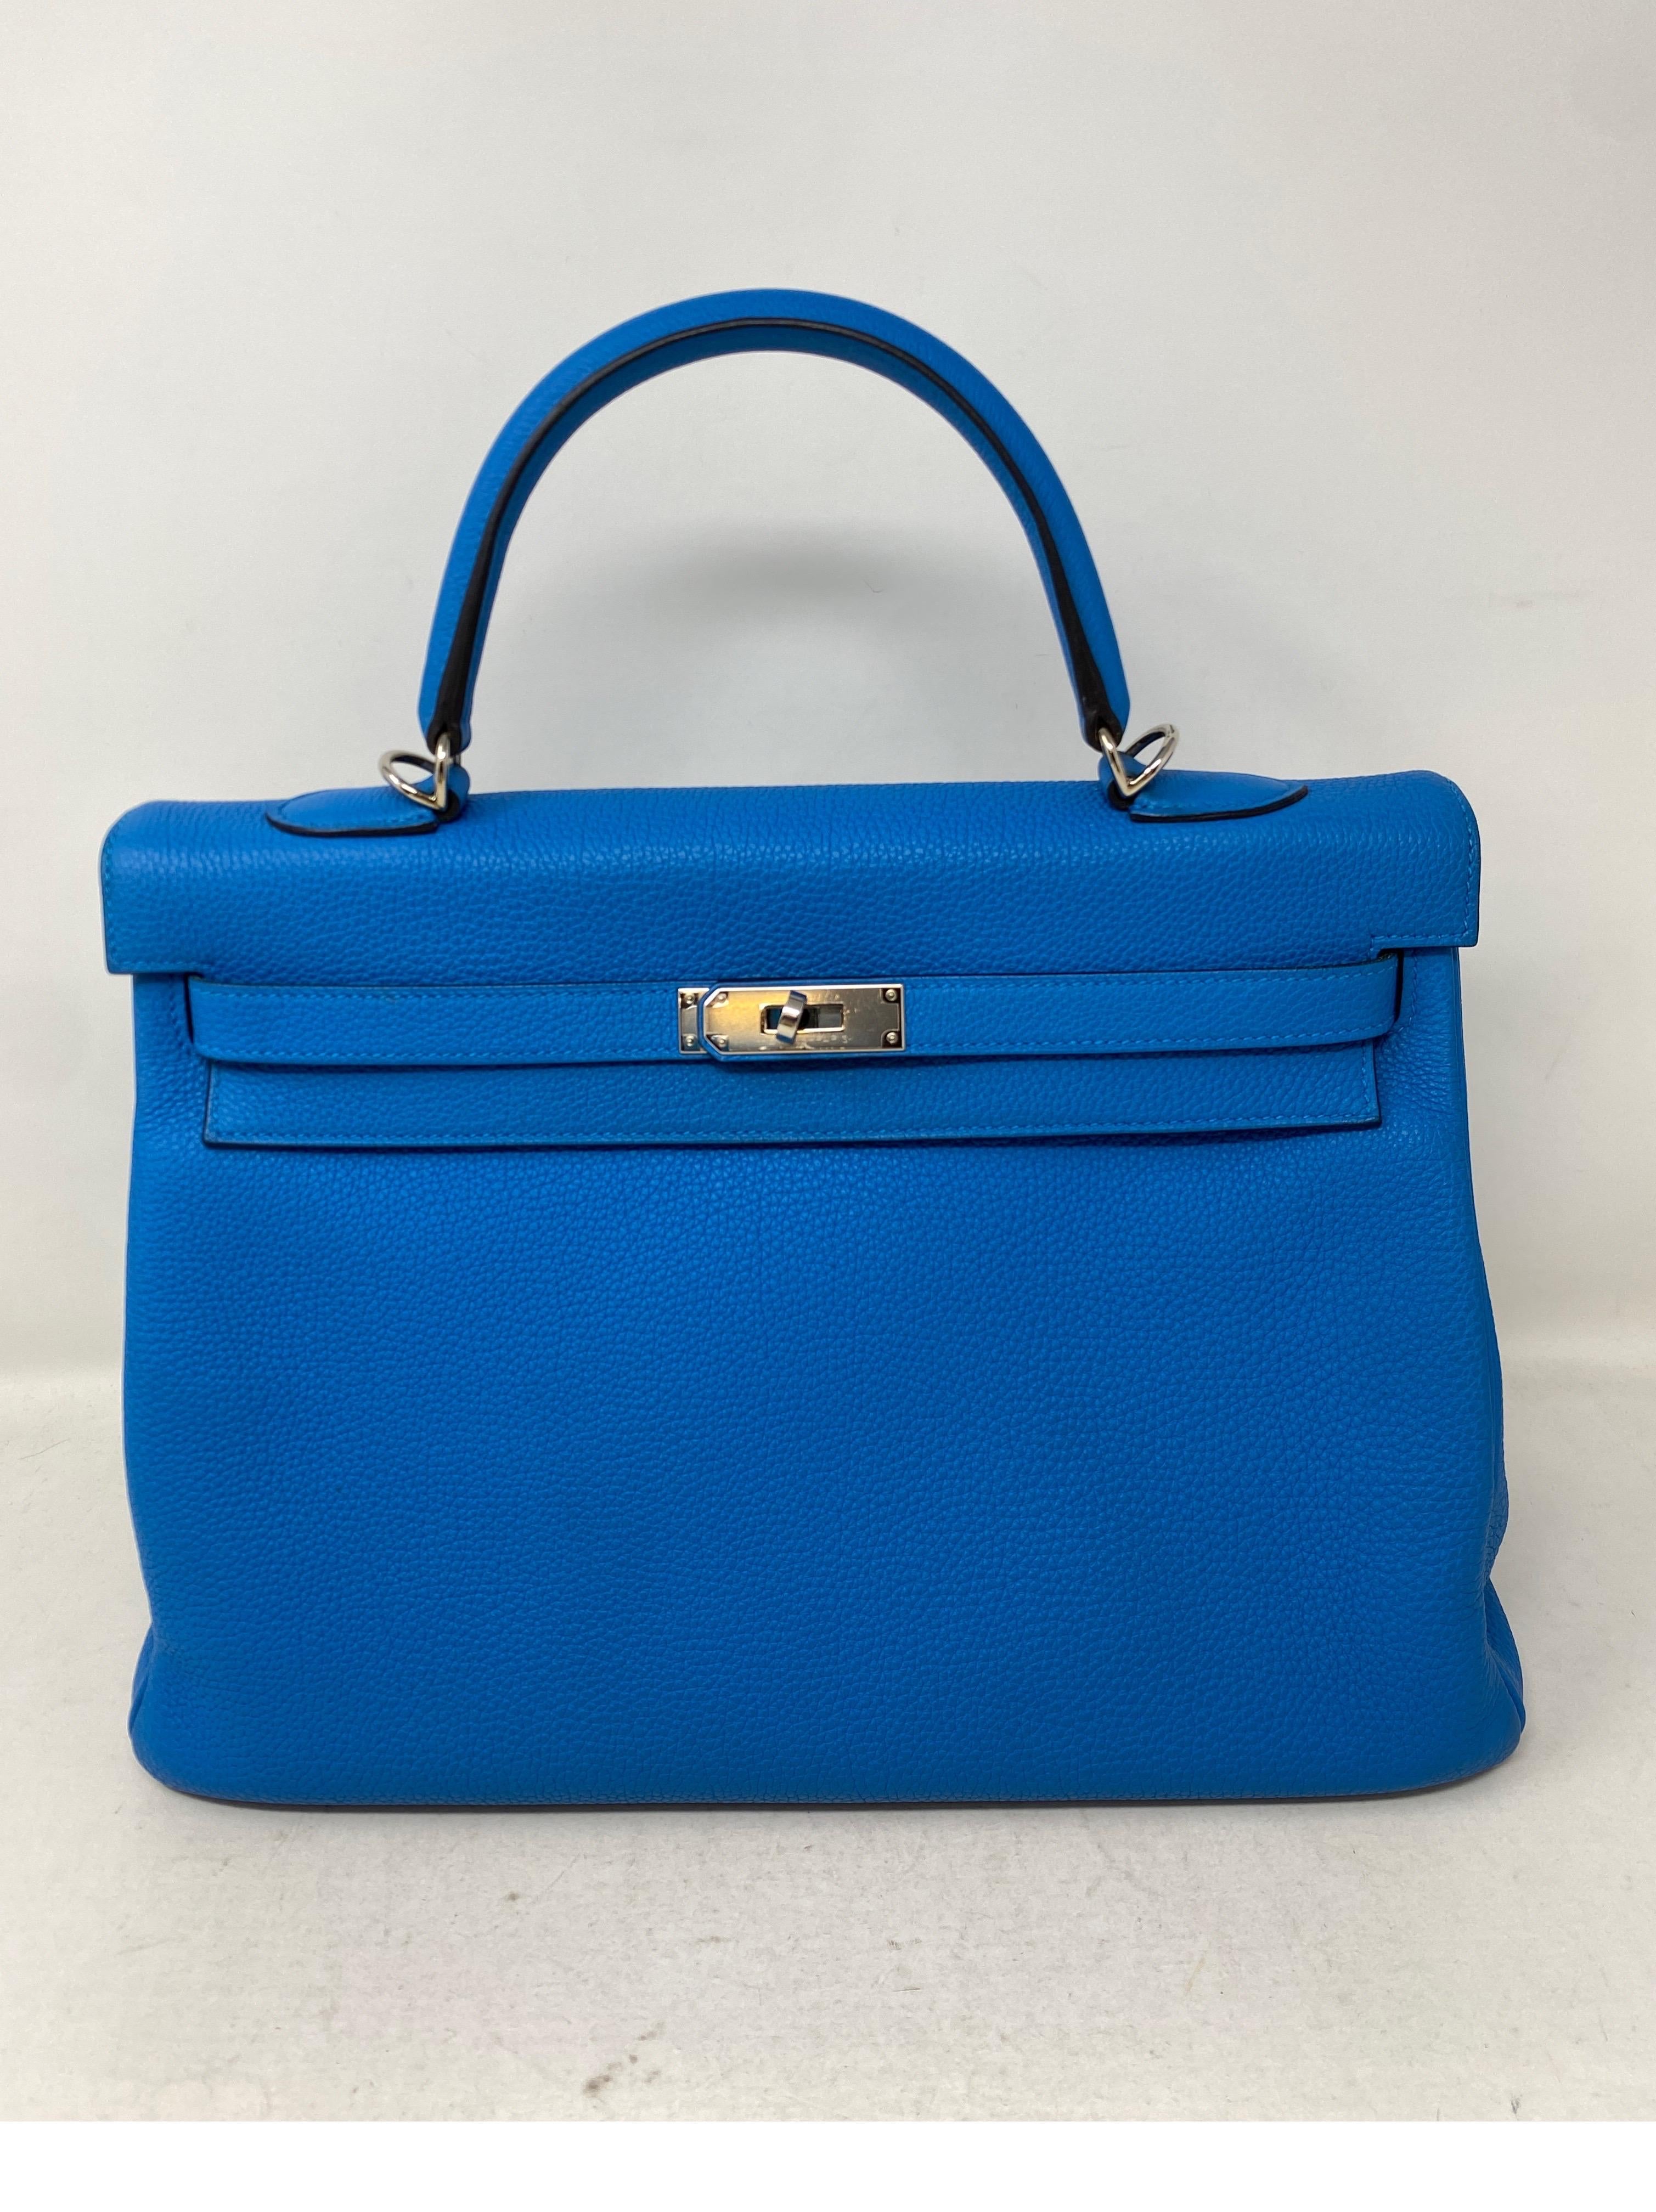 Hermes Kelly Zanzibar 35 Bag. Excellent condition. Vibrant blue color. Silver palladium hardware. Looks like new condition. Never used. Includes clochette, lock, keys, and dust bag. Guaranteed authentic. 